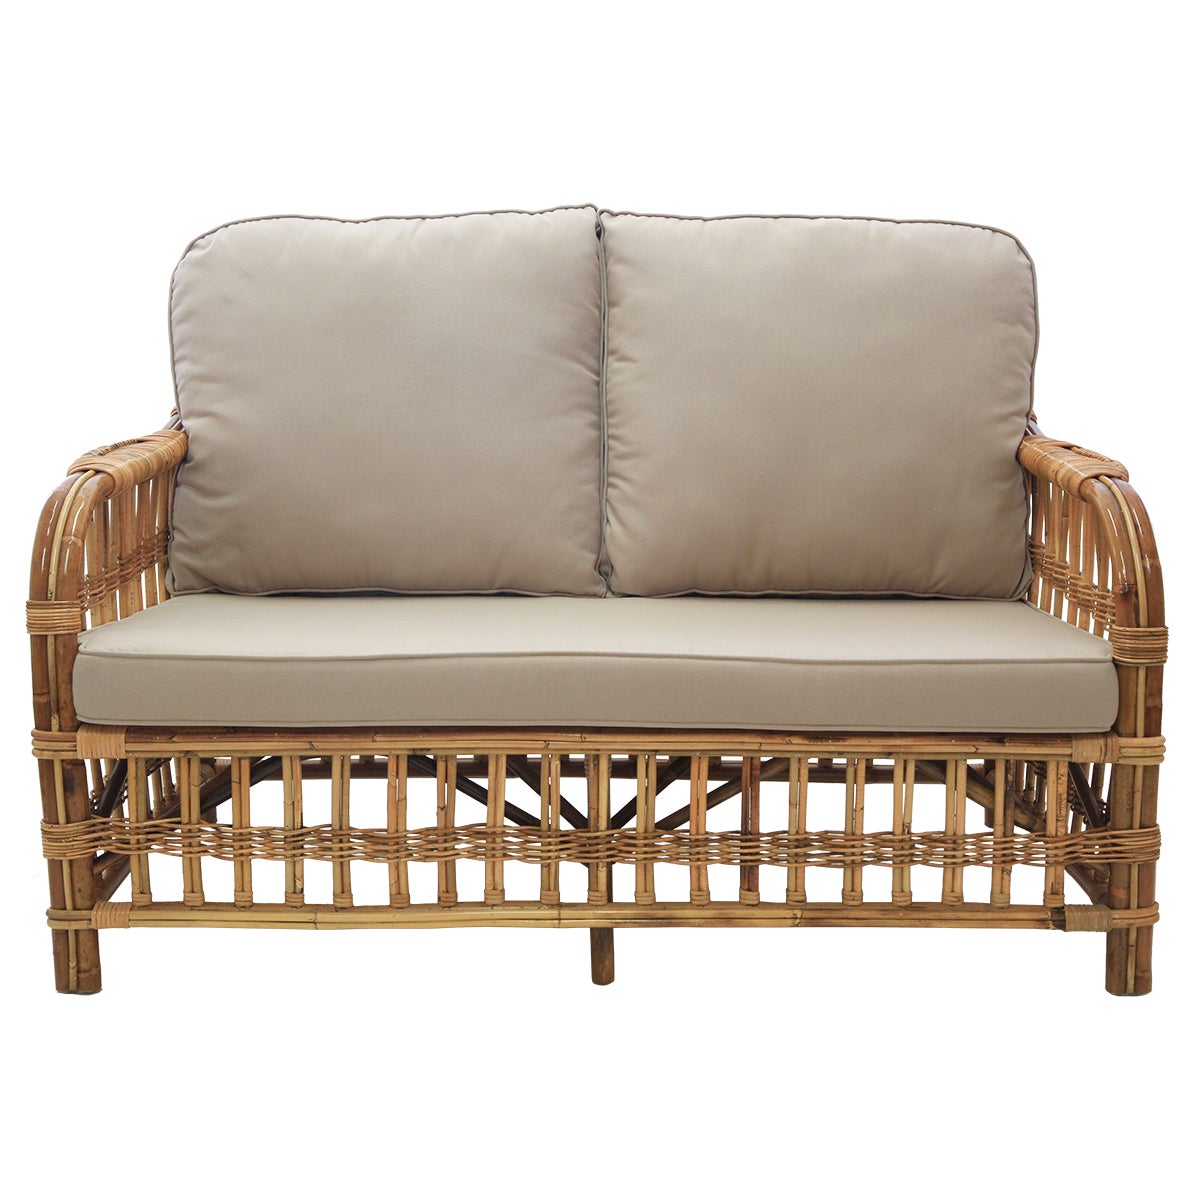 Baltimore Cane/Rattan 2 Seater/Settee with Cushions